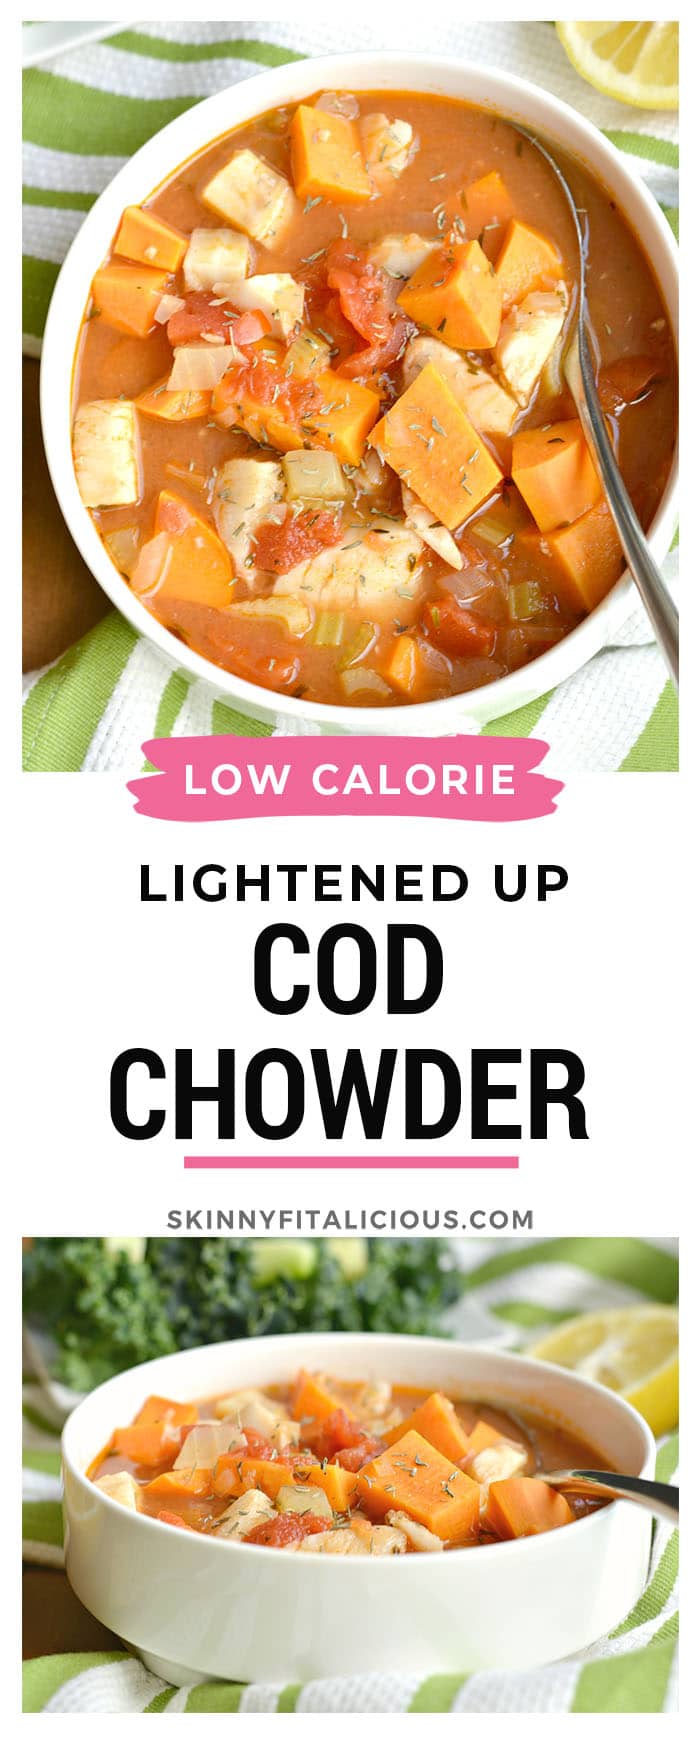 This Manhattan Cod Chowder is a lighter alternative to its traditional creamy version. An exquisite Spring soup made with simple and nutritious ingredients that cooks in less than 30 minutes. A guaranteed crowd pleaser! Gluten Free + Low Calorie + Paleo